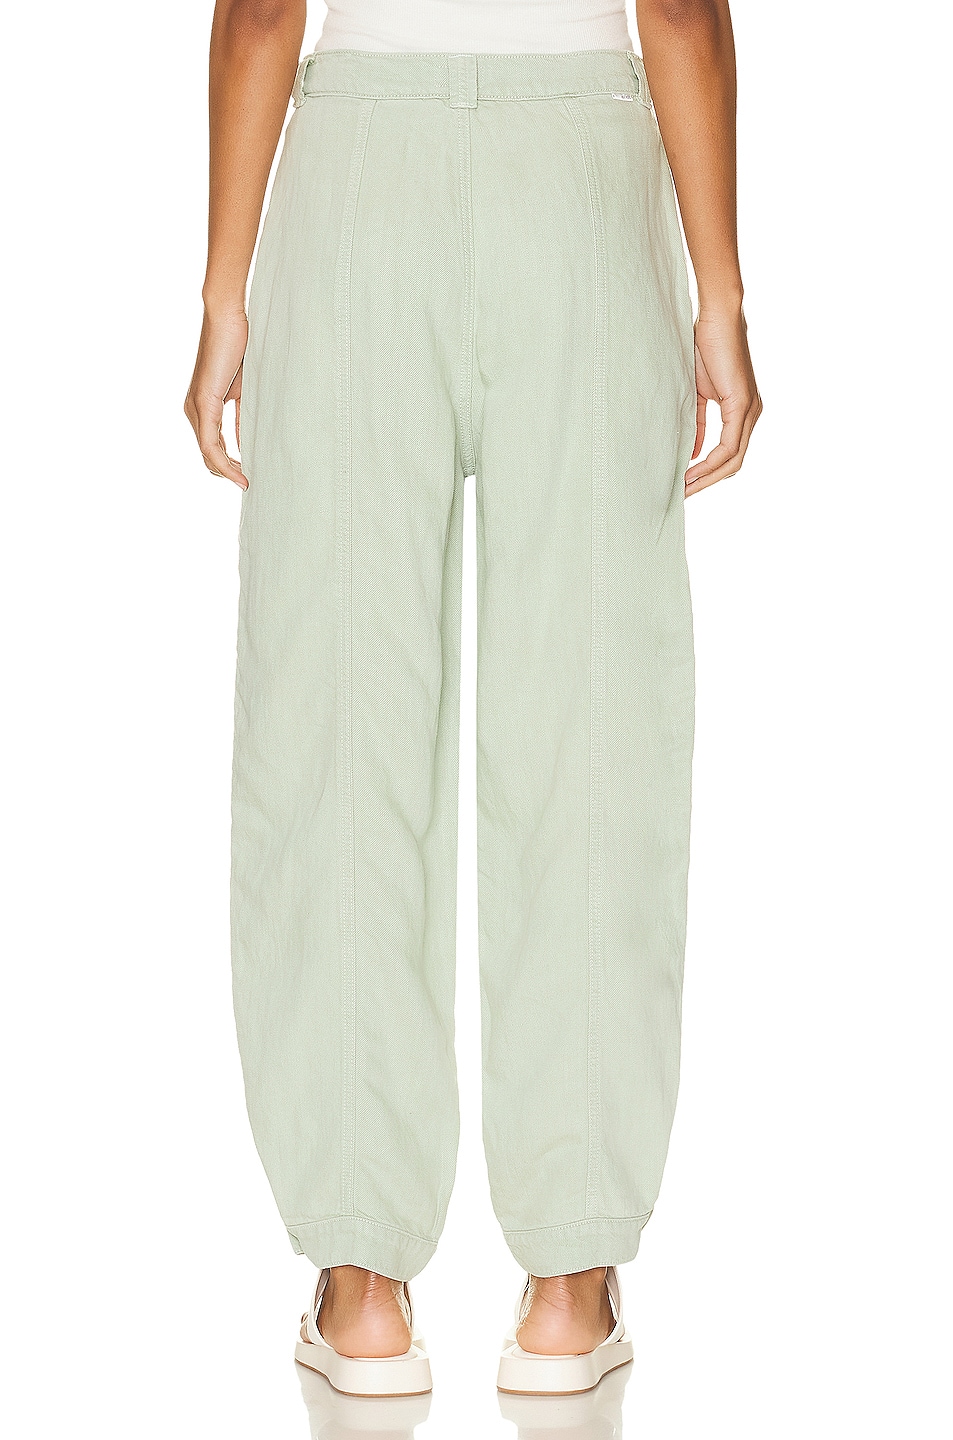 MOTHER The Patch Pocket Chute Flood in Cameo Green | FWRD